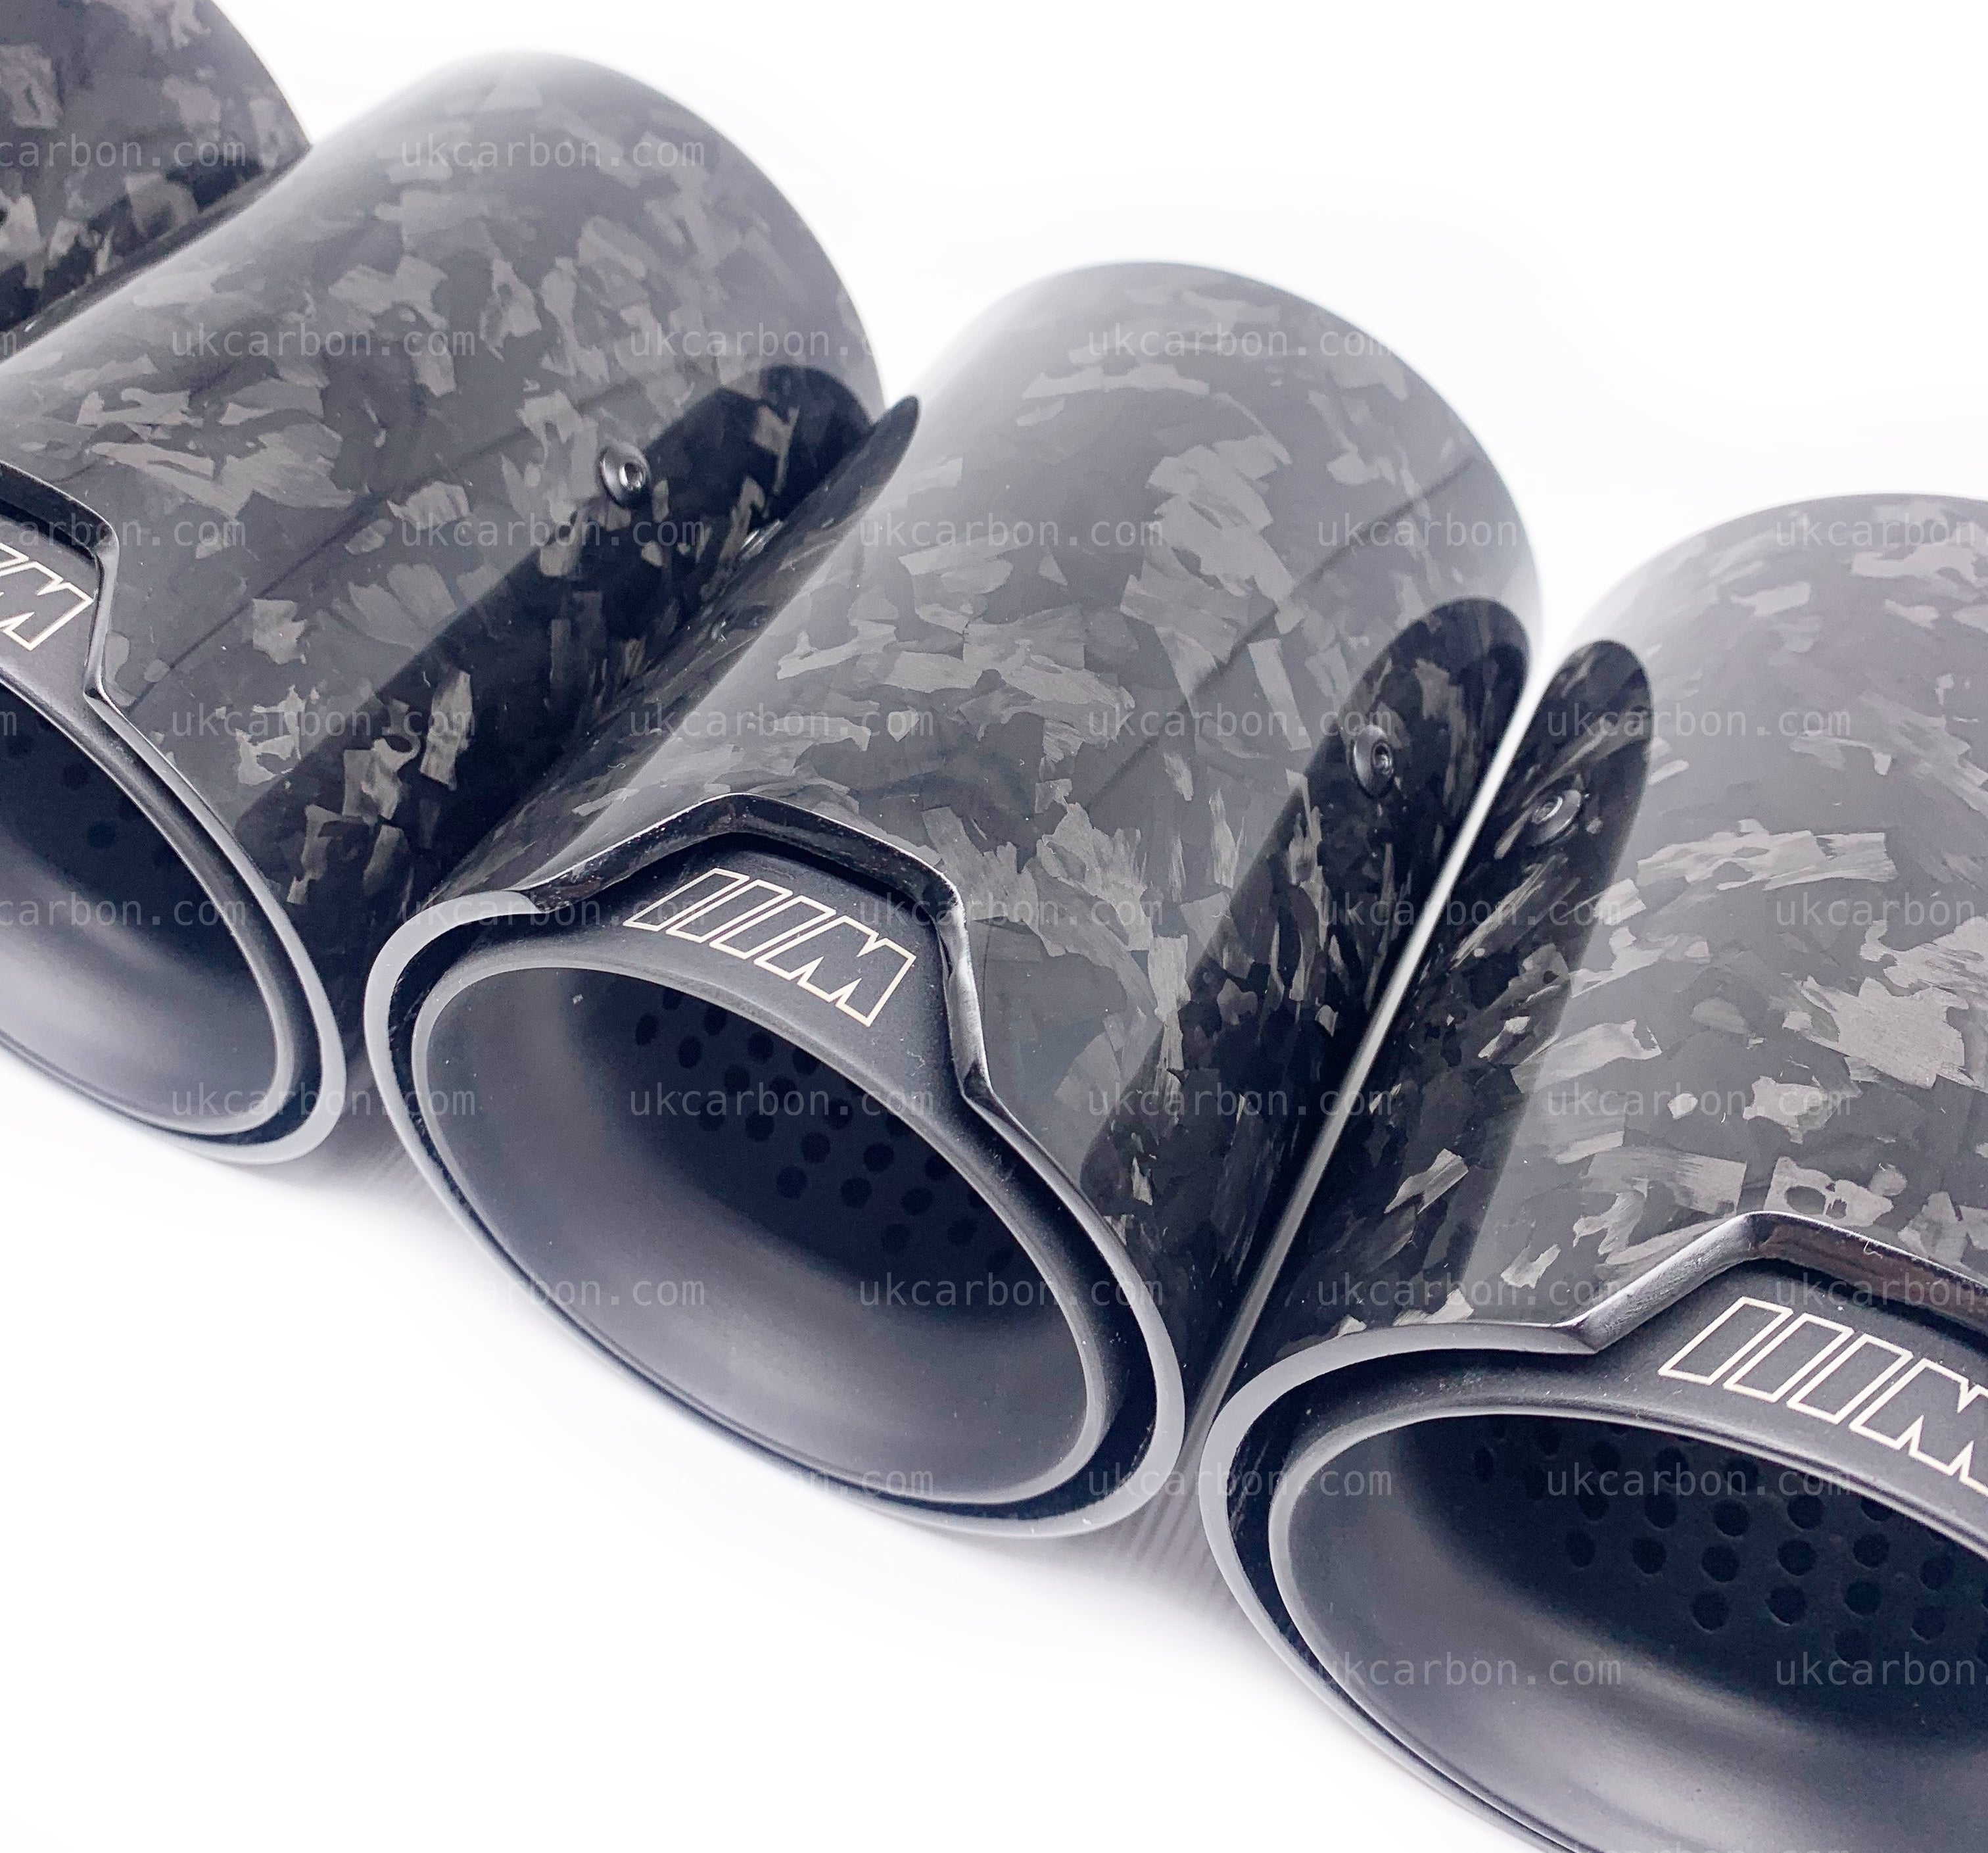 BMW M2 M3 M4 Exhaust Tips Black Forged Carbon Fibre F87 F80 F82 F83 by UKCarbon